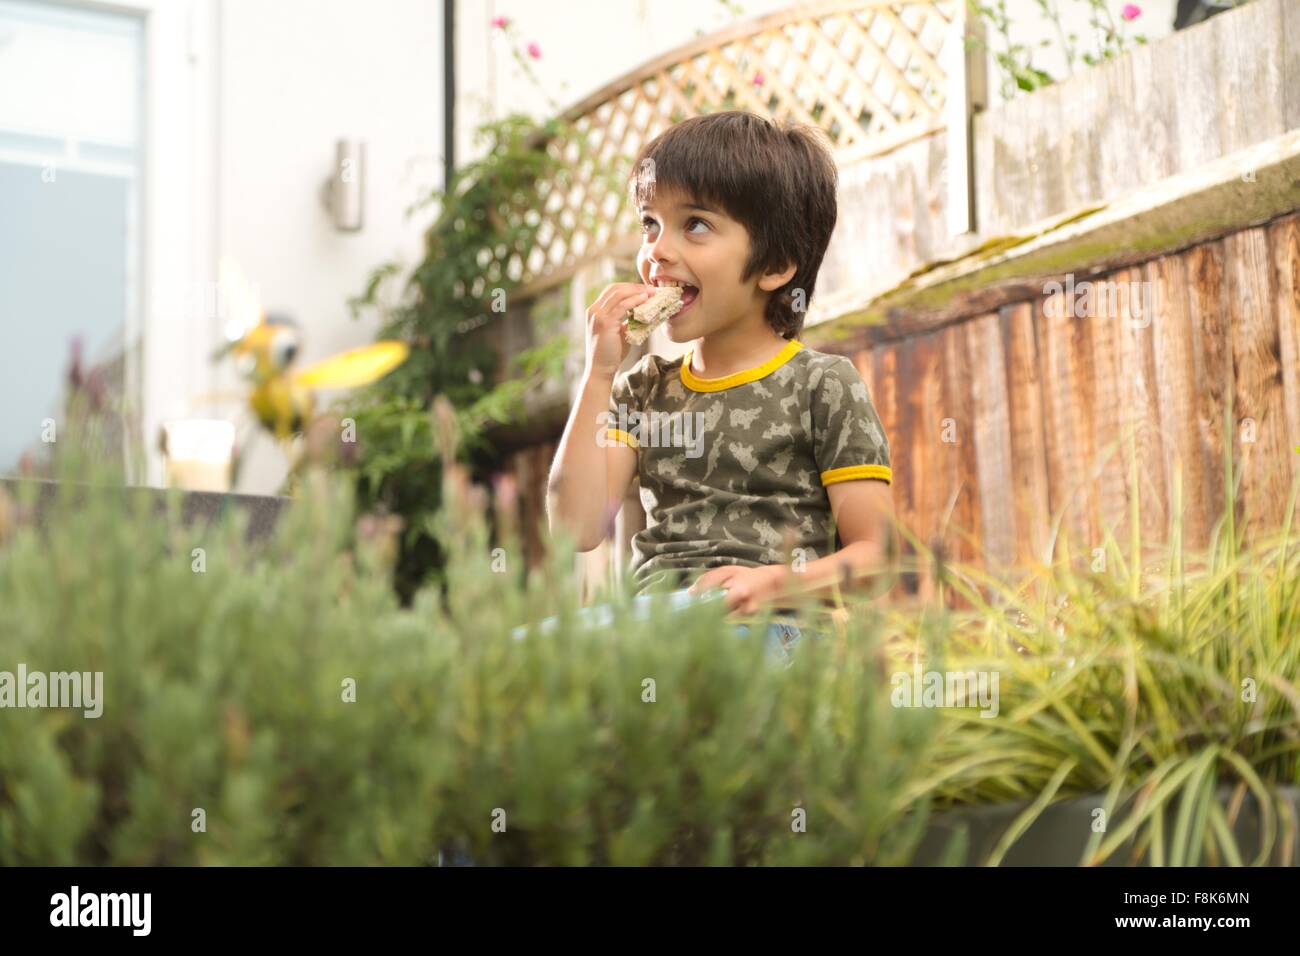 Low angle view of boy sitting in garden eating sandwich looking away Stock Photo